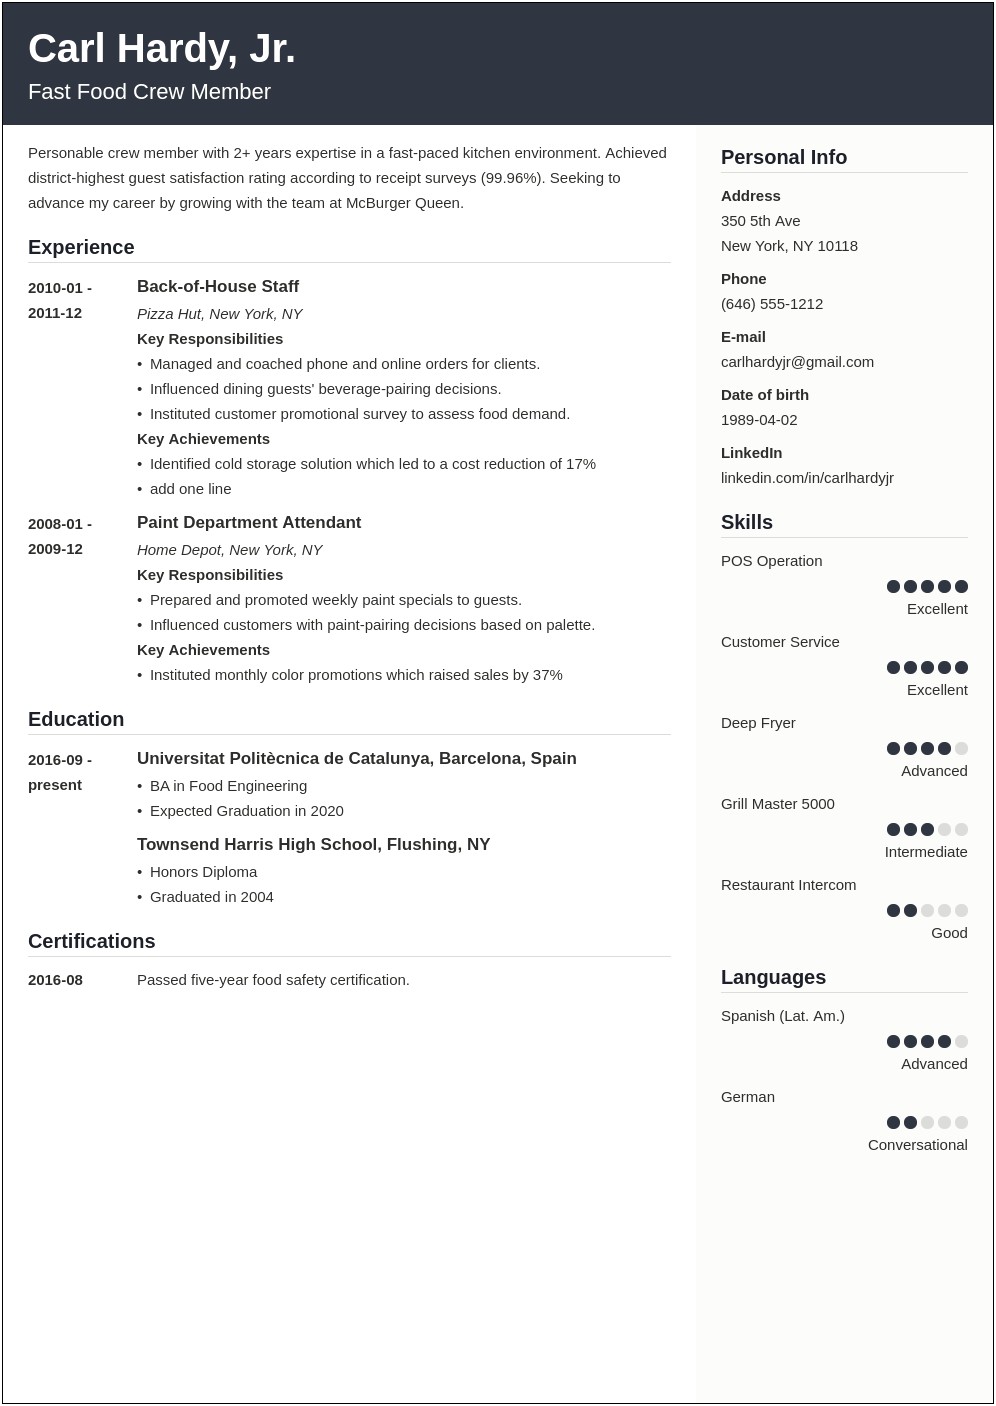 Professional Summary For Fast Food Resume